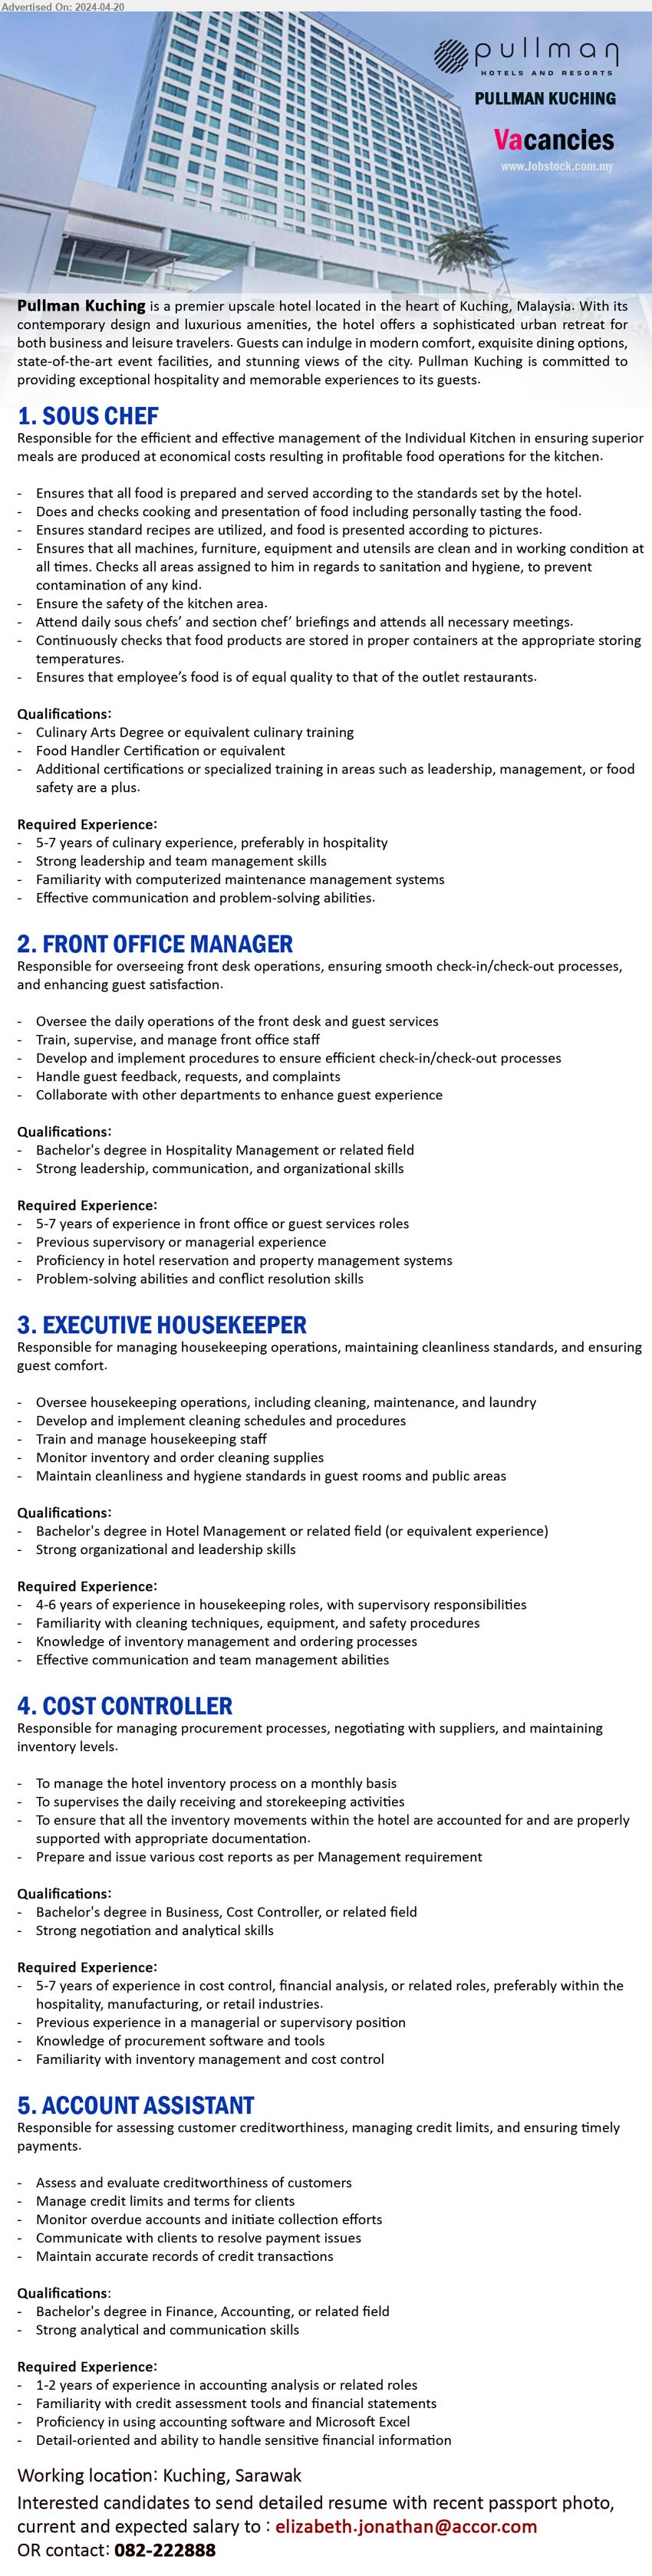 PULLMAN KUCHING - 1. SOUS CHEF (Kuching), Culinary Arts Degree or equivalent culinary training, Food Handler Certification or equivalent,...
2. FRONT OFFICE MANAGER (Kuching), Bachelor's Degree in Hospitality Management, 5-7 years of experience in front office or guest services roles,...
3. EXECUTIVE HOUSEKEEPER (Kuching), Bachelor's Degree in Hotel Management, 4-6 years of experience in housekeeping roles, ...
4. COST CONTROLLER (Kuching), Bachelor's Degree in Business, Cost Controller, 5-7 years of experience in cost control, financial analysis, or related roles, ...
5. ACCOUNT ASSISTANT (Kuching), Bachelor's Degree in Finance, Accounting,...
Call 082-222888 / Email resume to ...